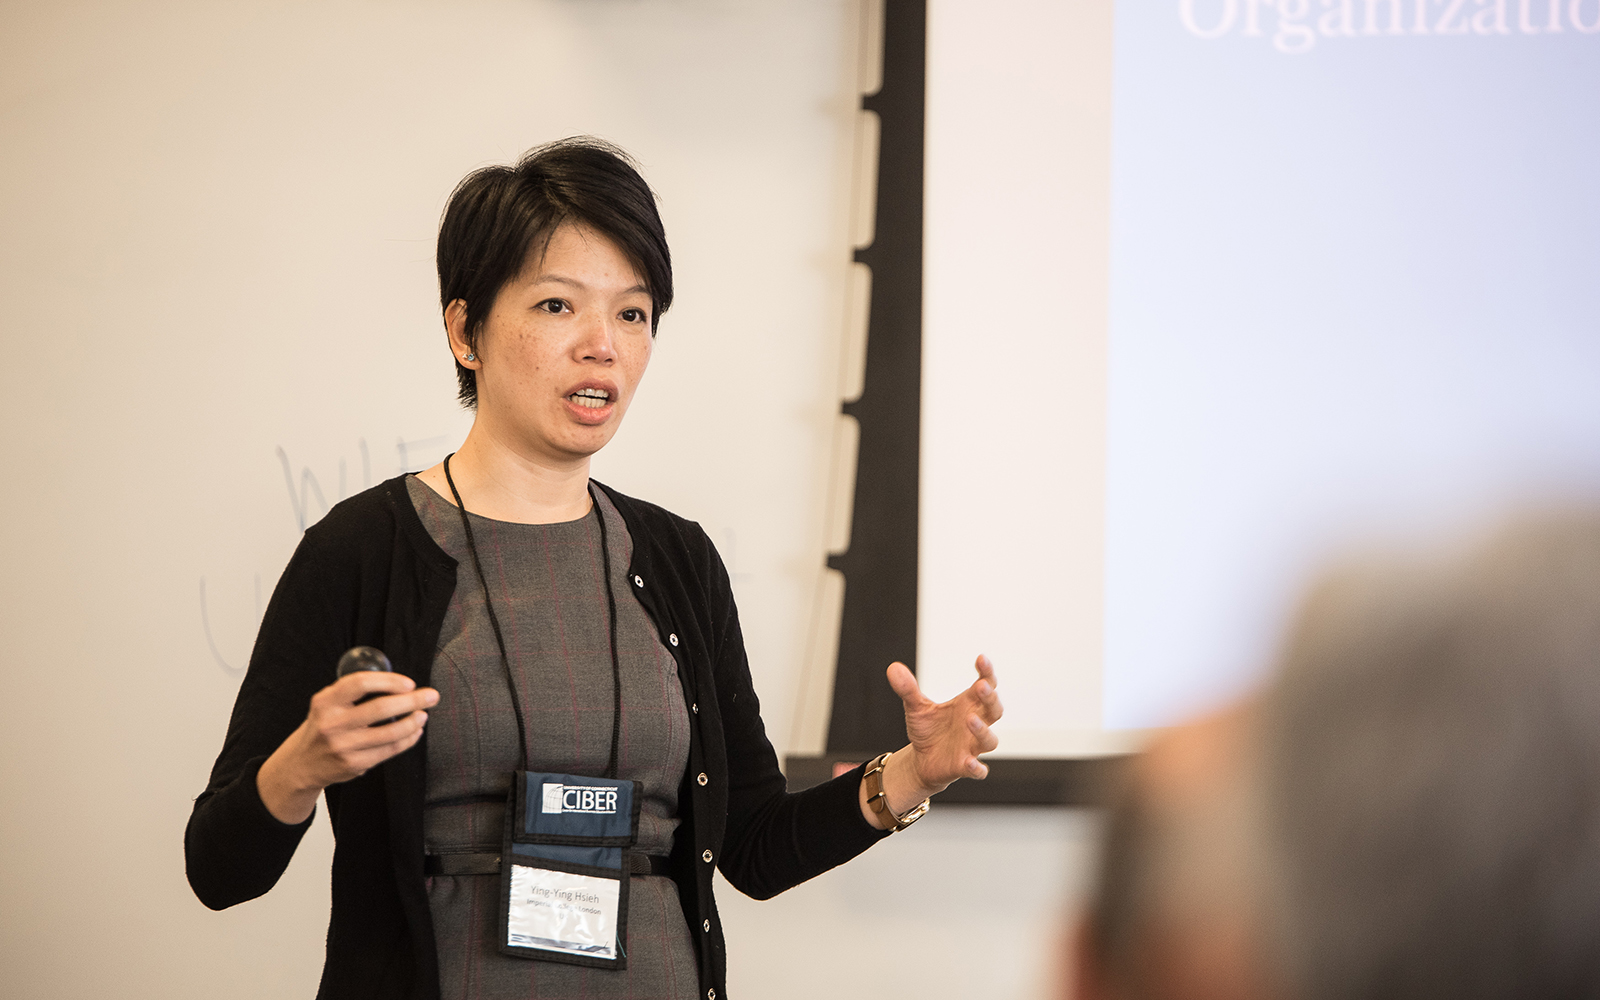 Ying-Ying Hsieh, at UConn's Blockchain Technology & Organizations Research Symposium on Aug. 14 in Stamford. (Nathan Oldham/UConn School of Business)